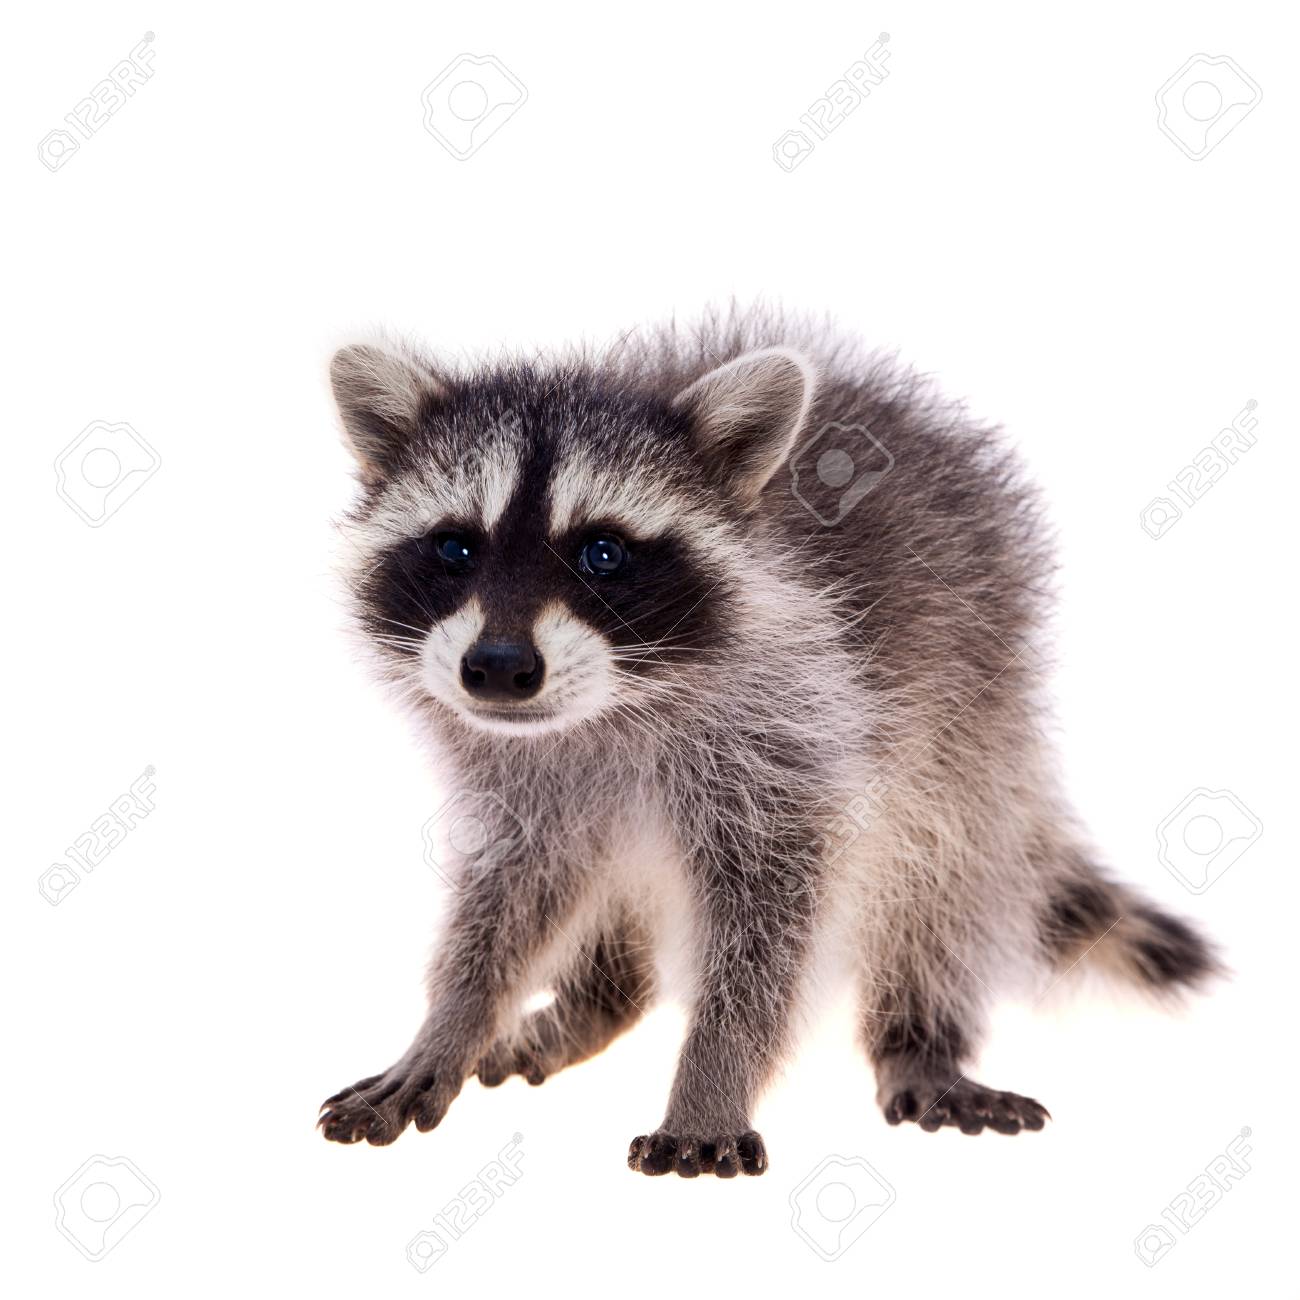 Baby Raccoon On White Background Stock Photo Picture And Royalty